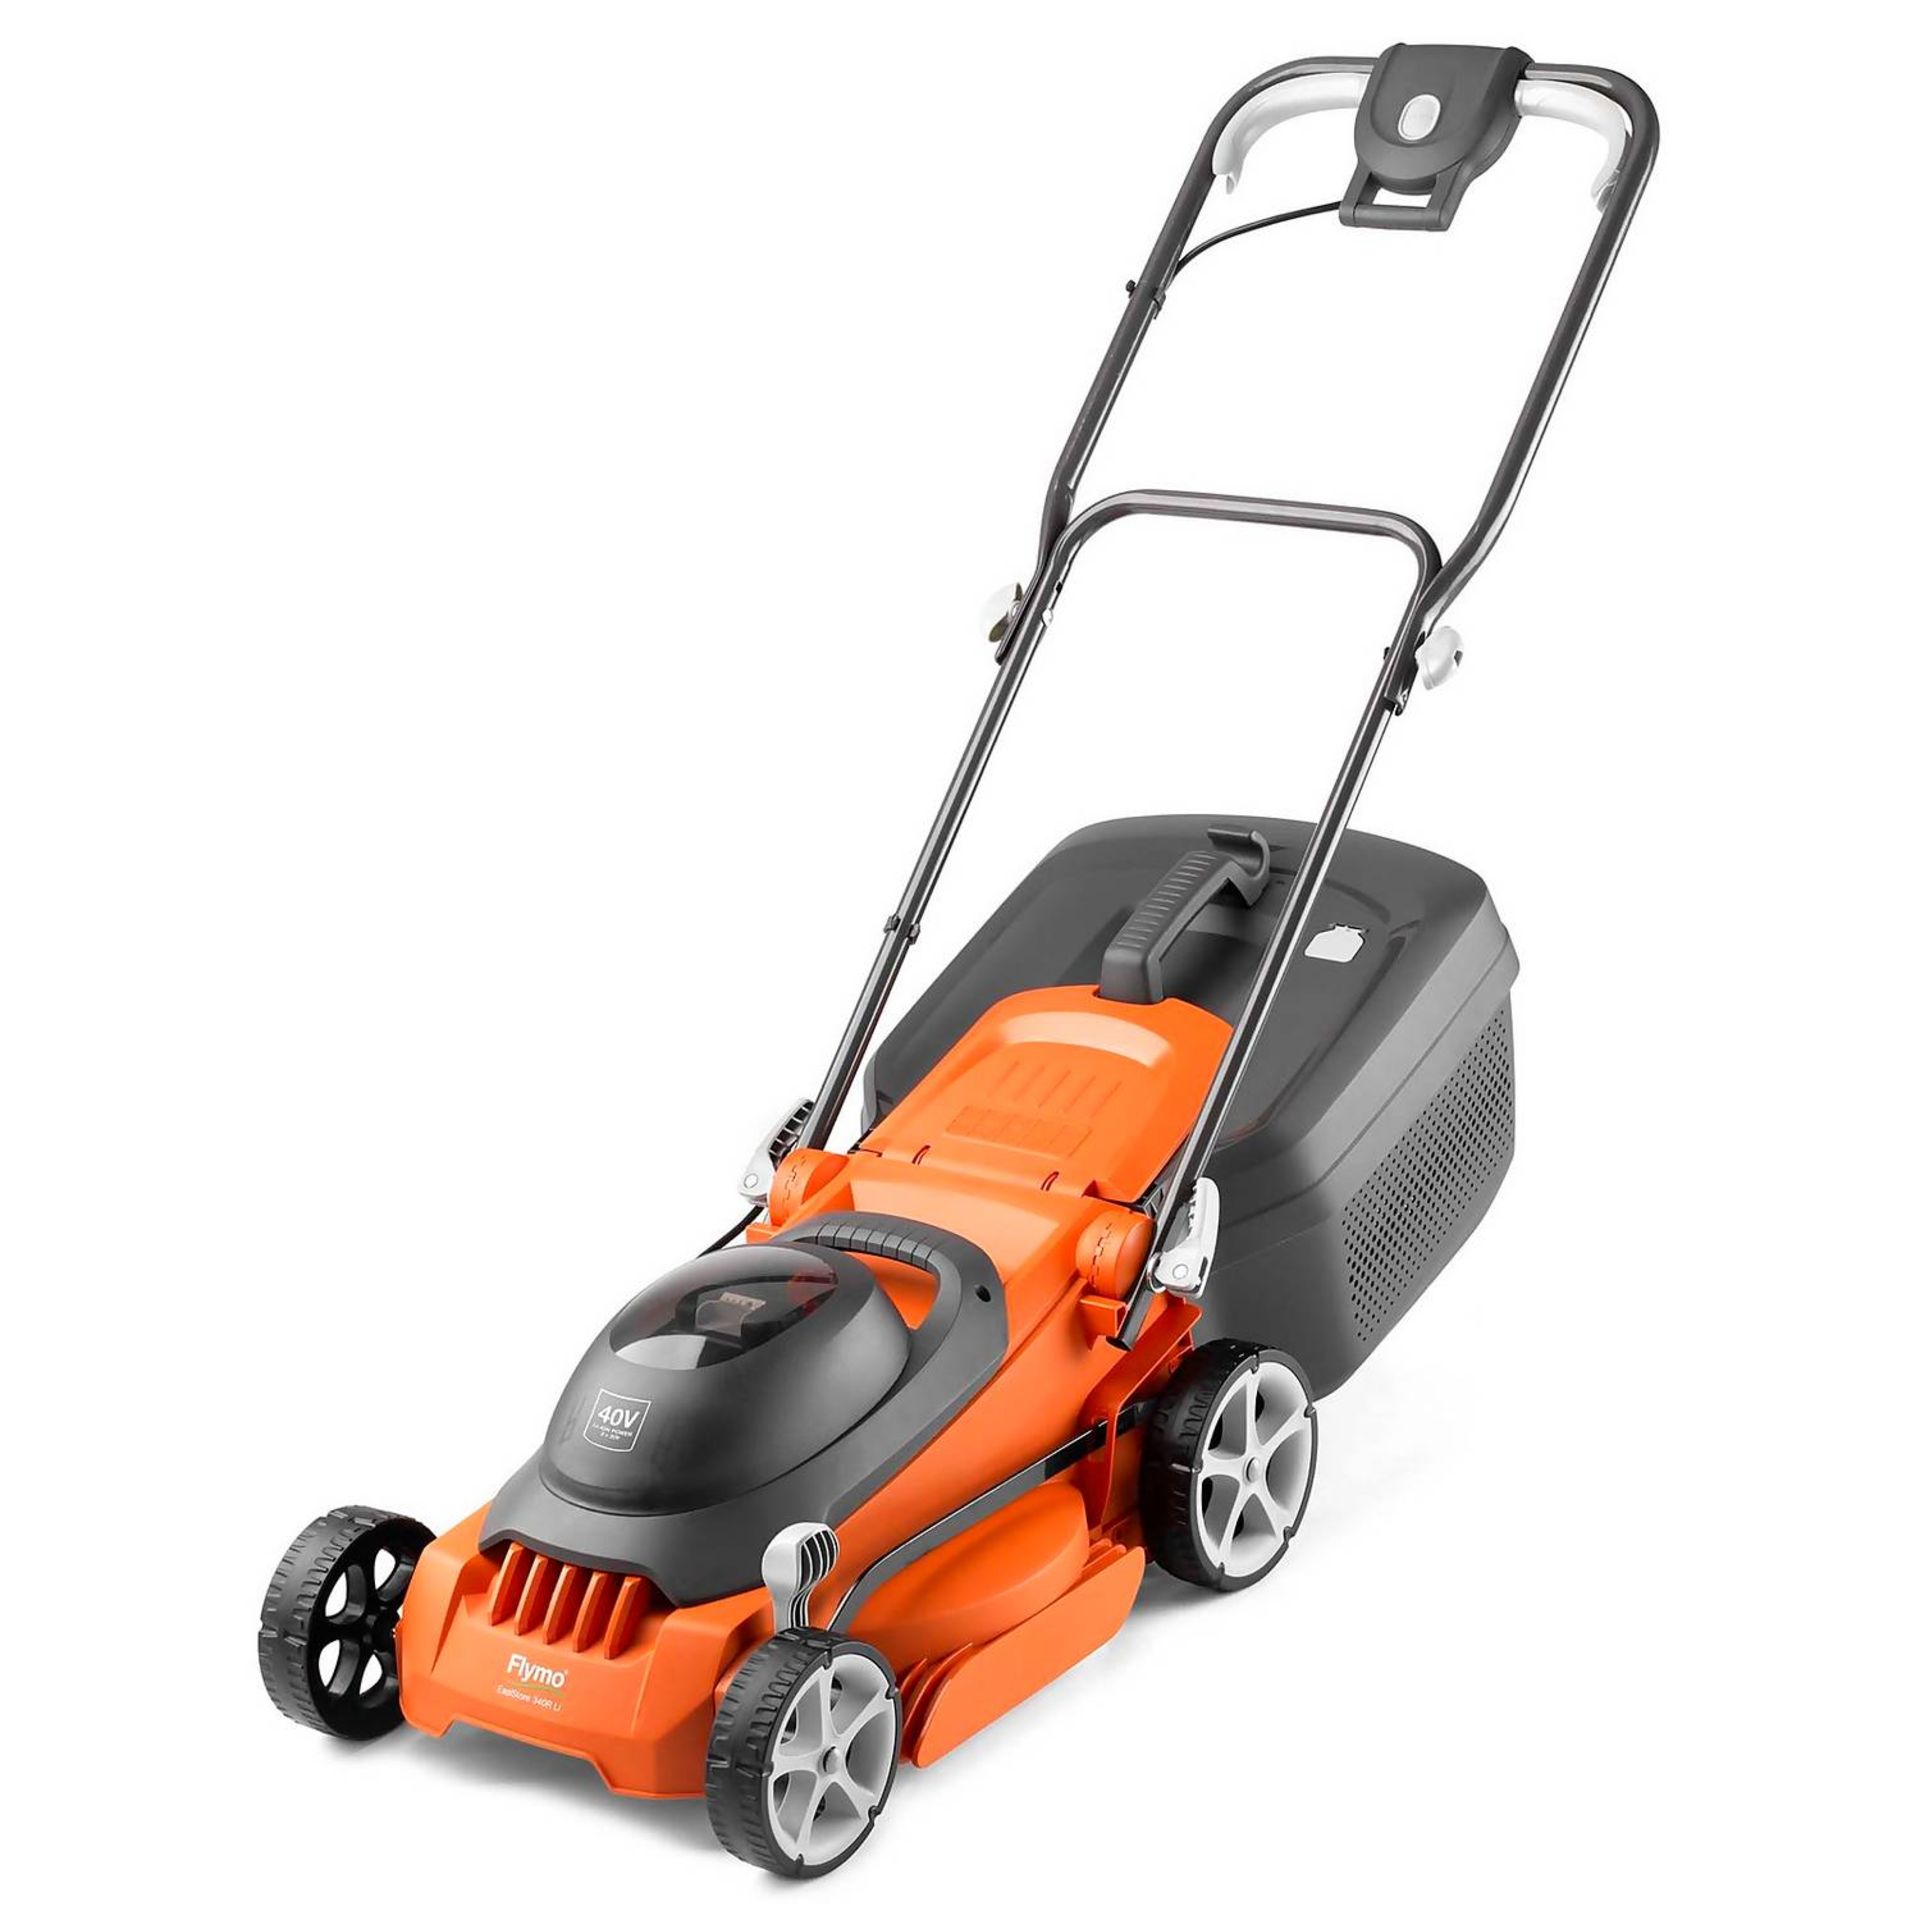 (R1H) 1x Flymo EasiStore 340R Li 40V Cordless Lawn Mower RRP £230. (With Battery & Charger).